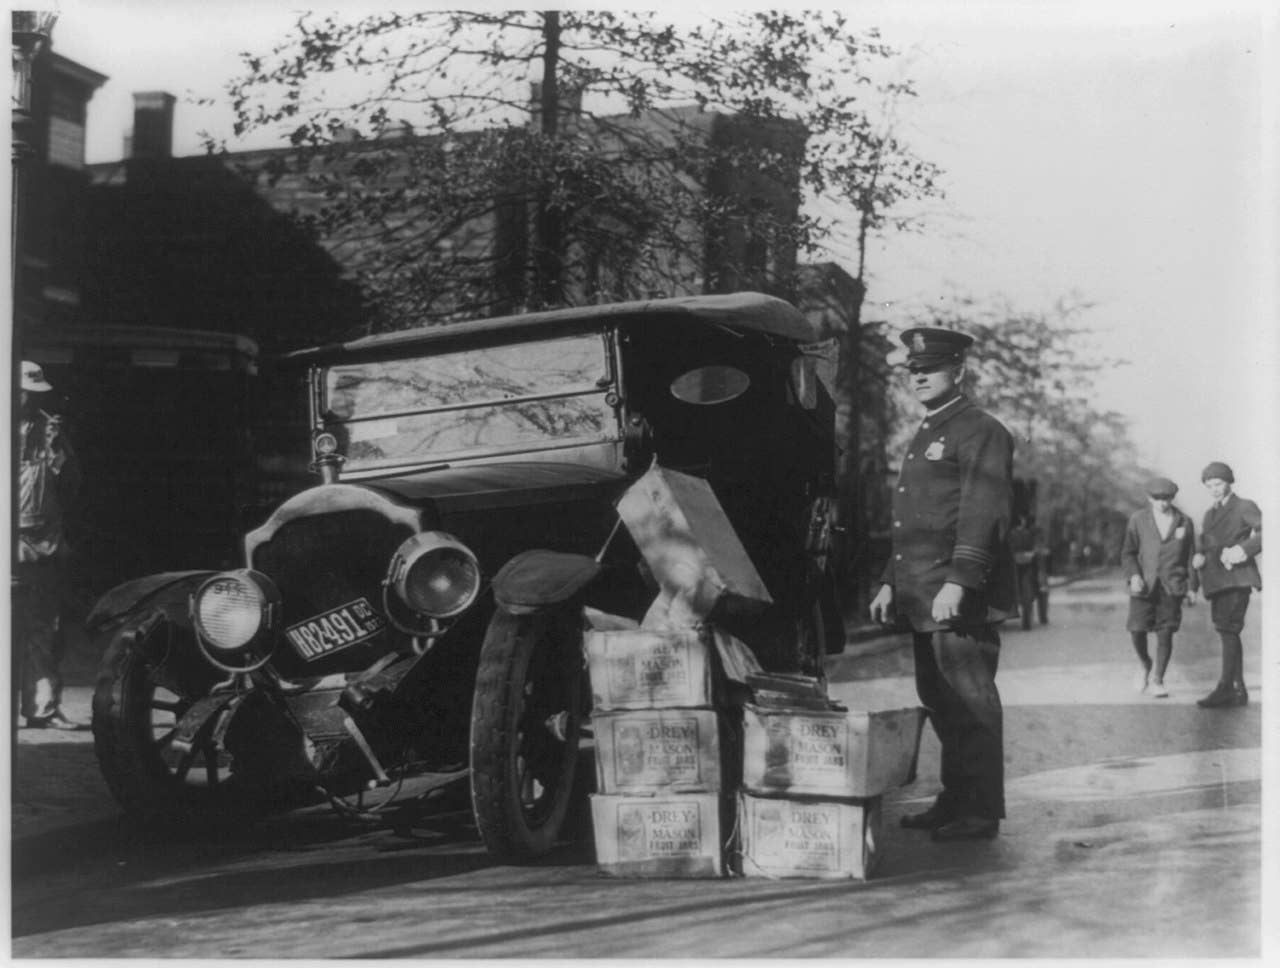 Black-and-white photograph of policeman standing alongside wrecked car and cases of liquor. Courtesy of the Prints and Photographs Division, Library of Congress, Washington, D. C.